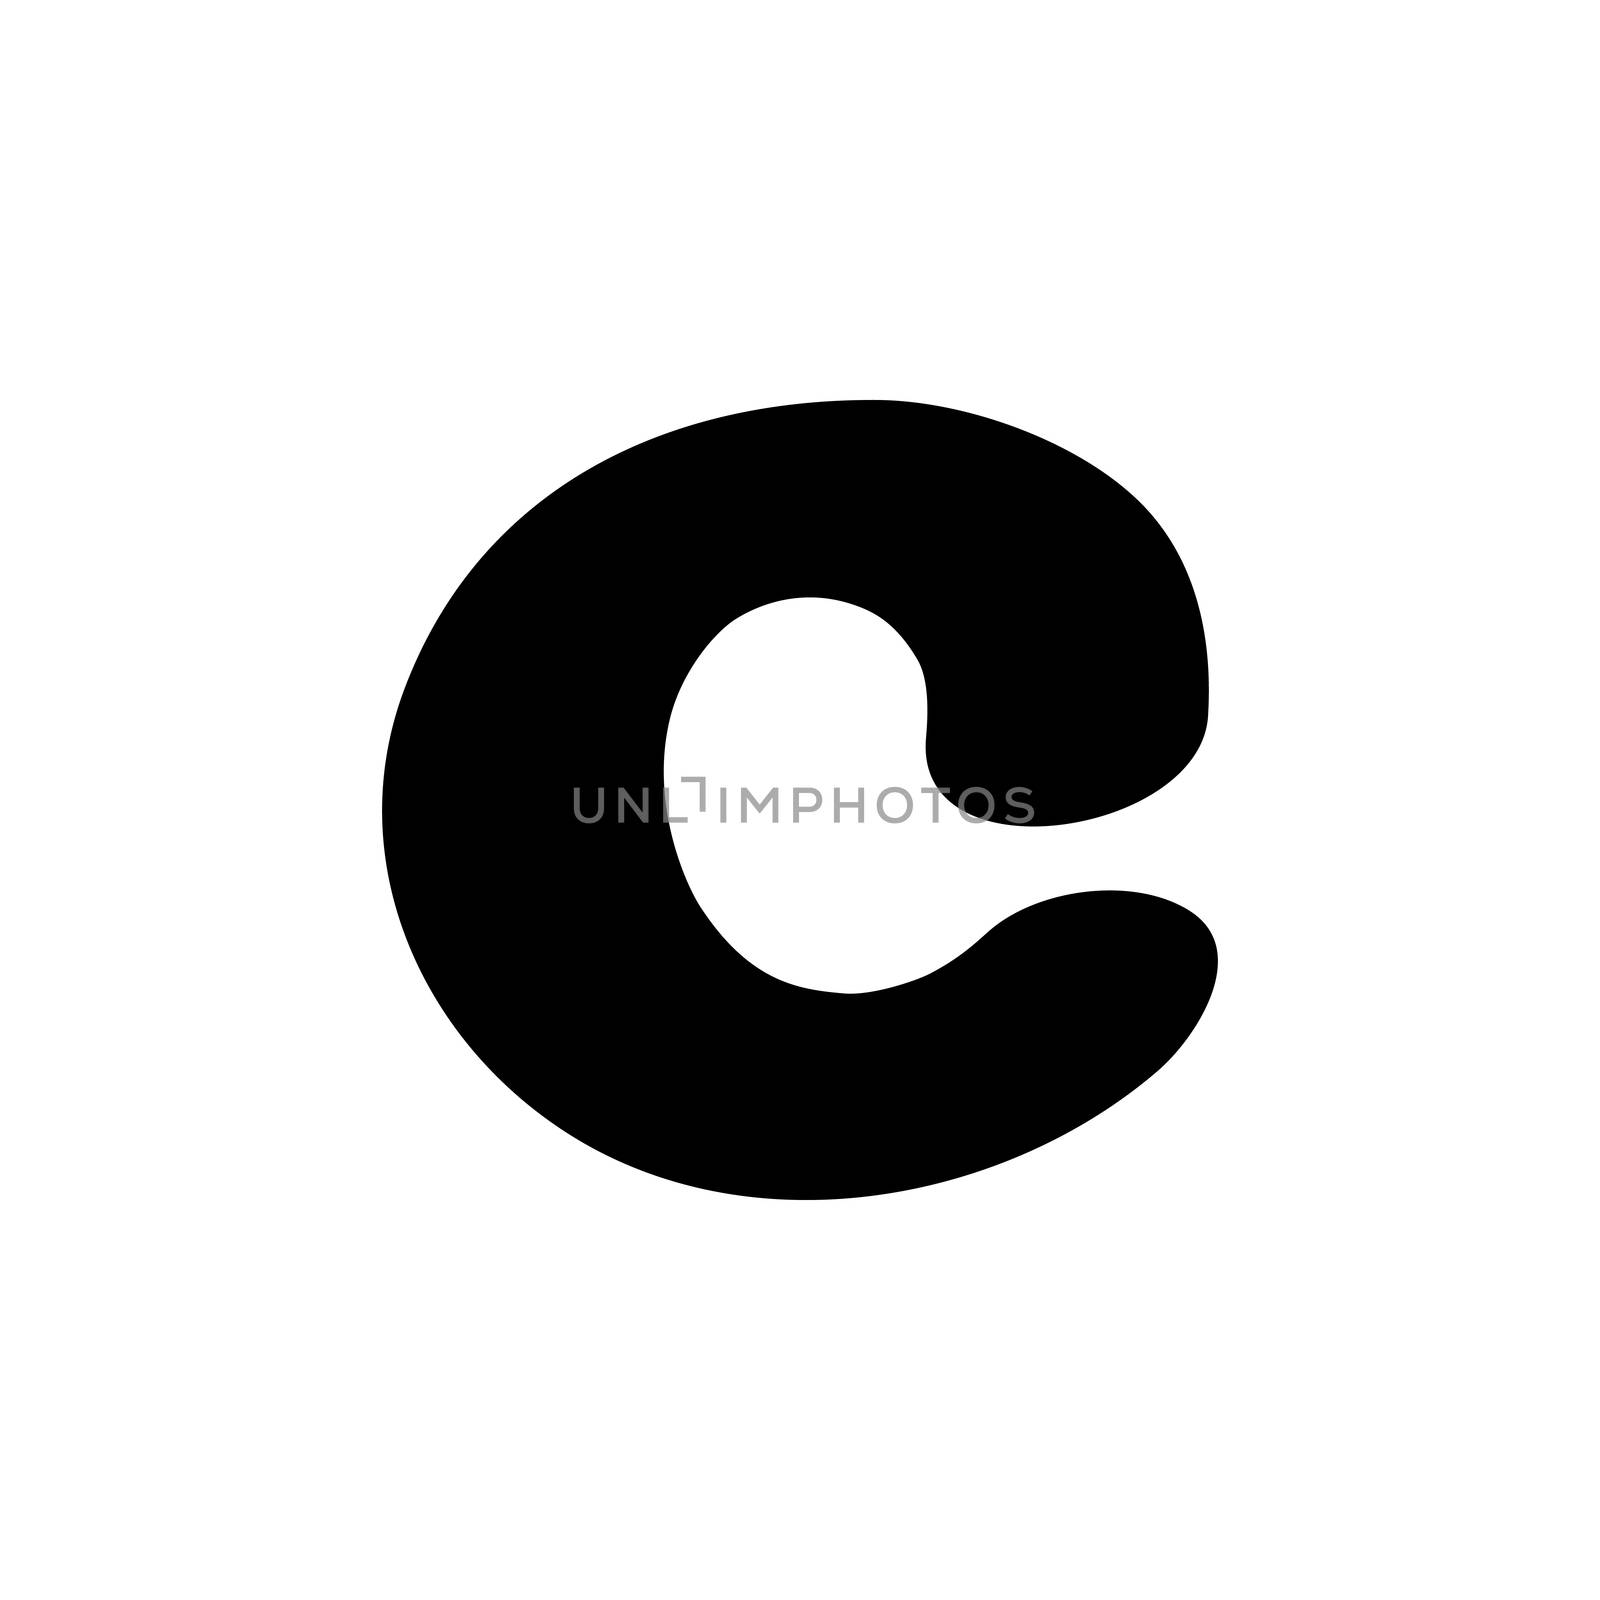 Decorated original font, a funny fat small letter isolated on white, part of a full series